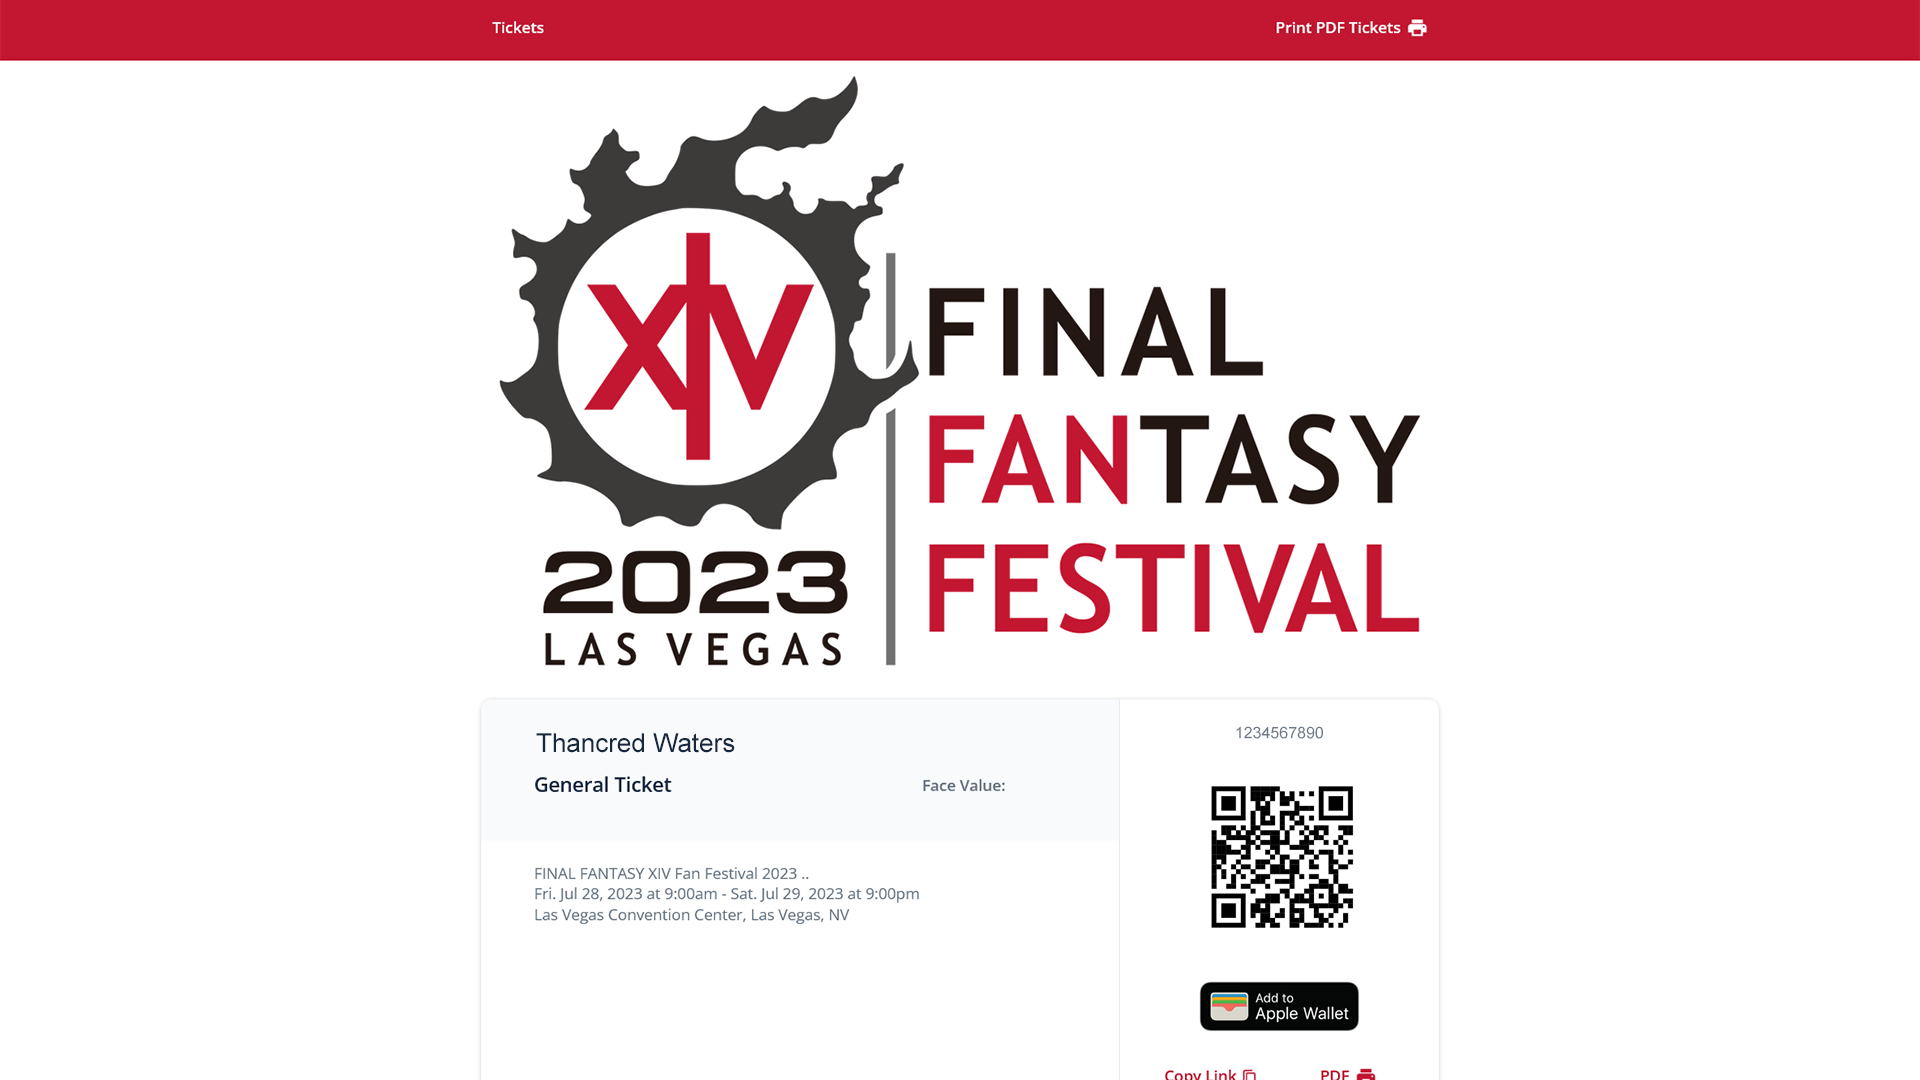 Example of a ticket page with a QR code.